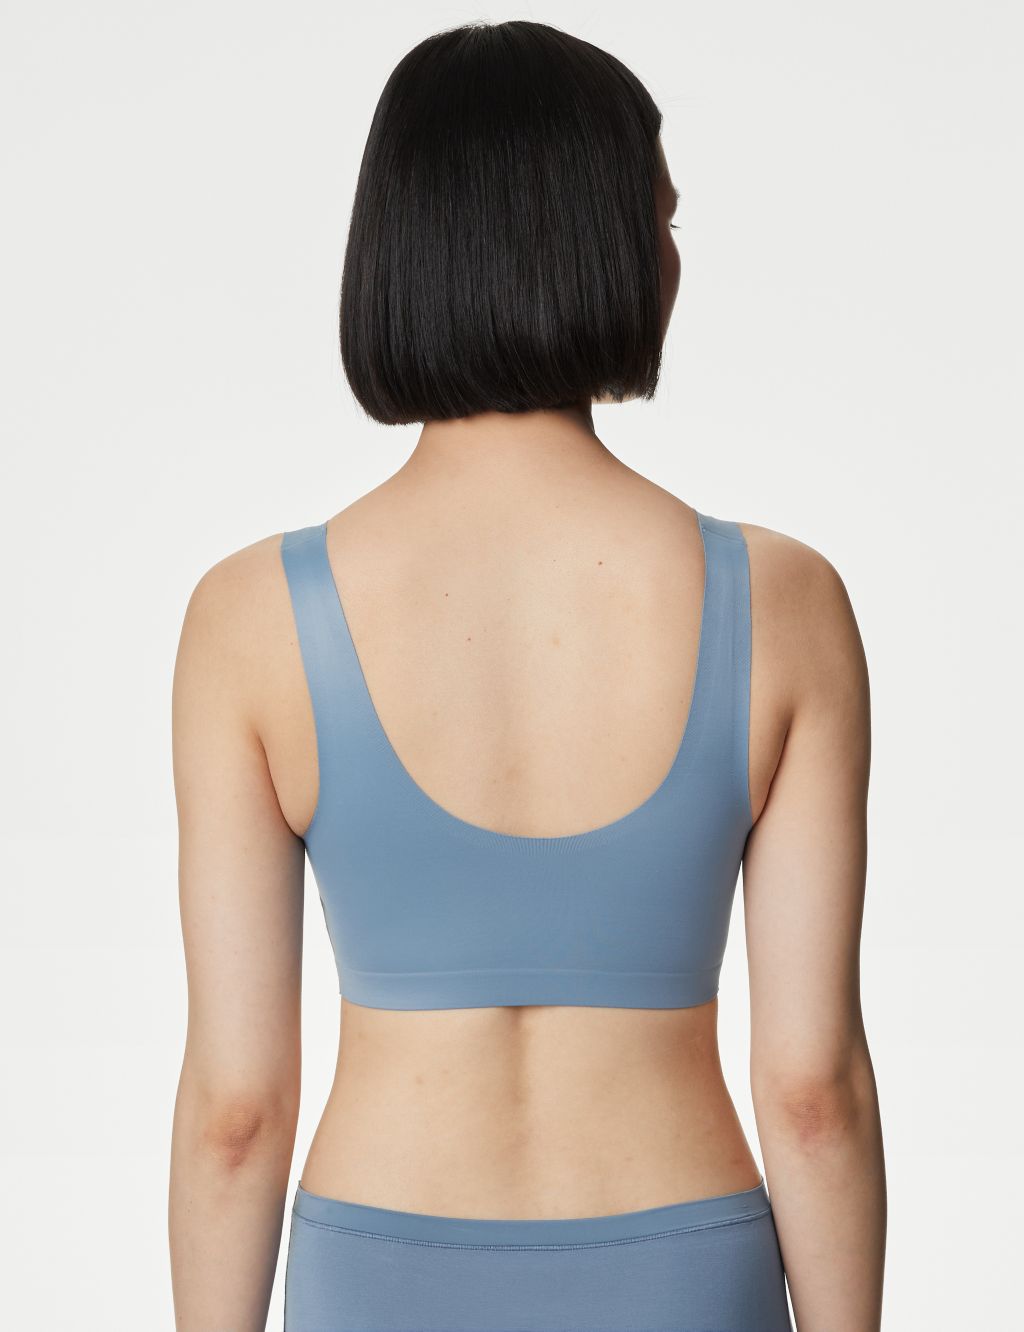 Flexifit™ Non Wired Crop Top image 5